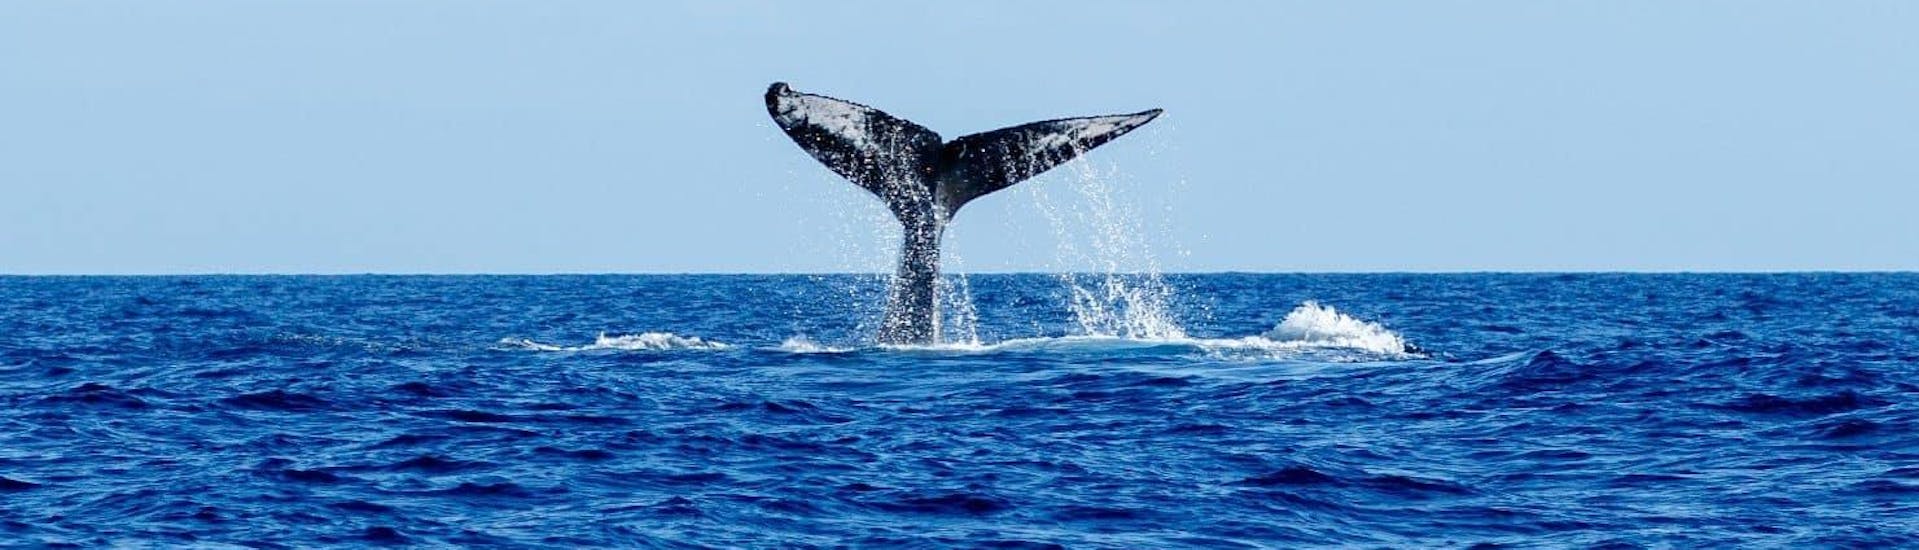 Whale Watching & Swimming with Dolphins from Funchal.